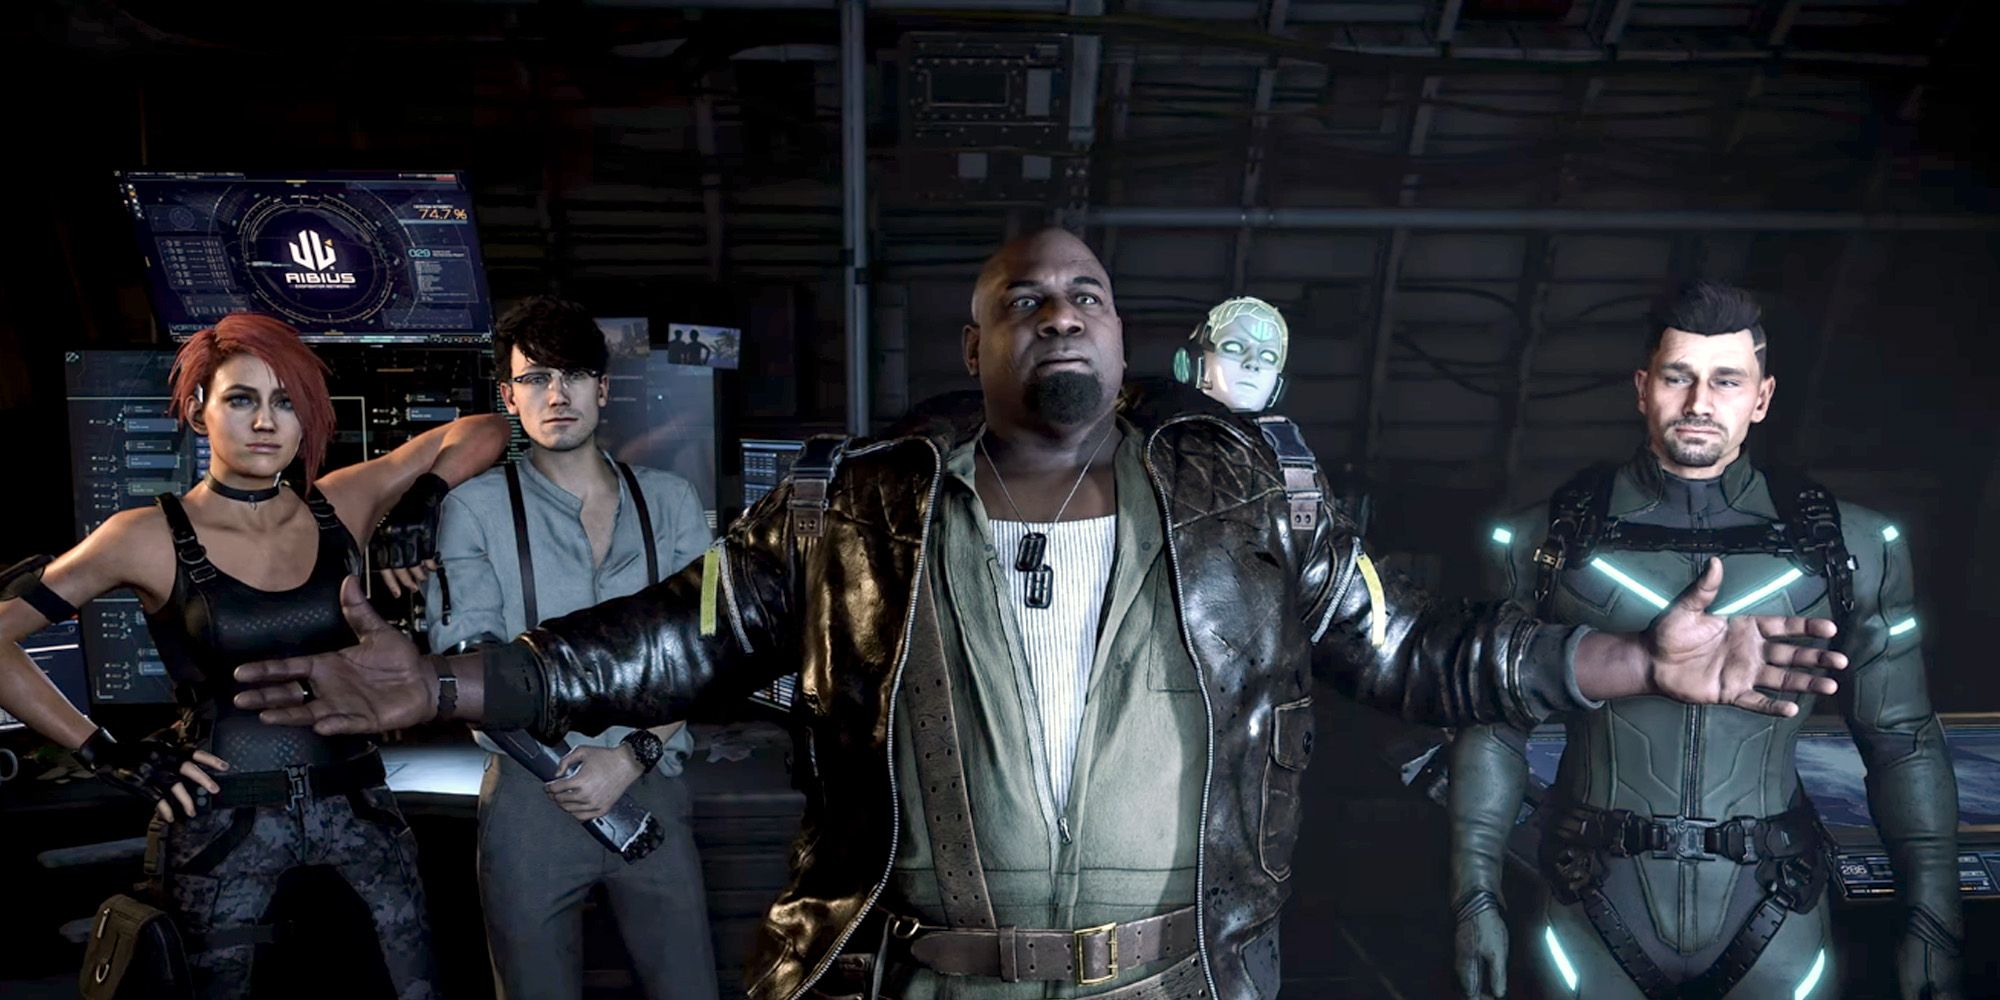 Cast of characters from the upcoming game Exoprimal standing in front of a sci-fi computer system, four humans and one android.